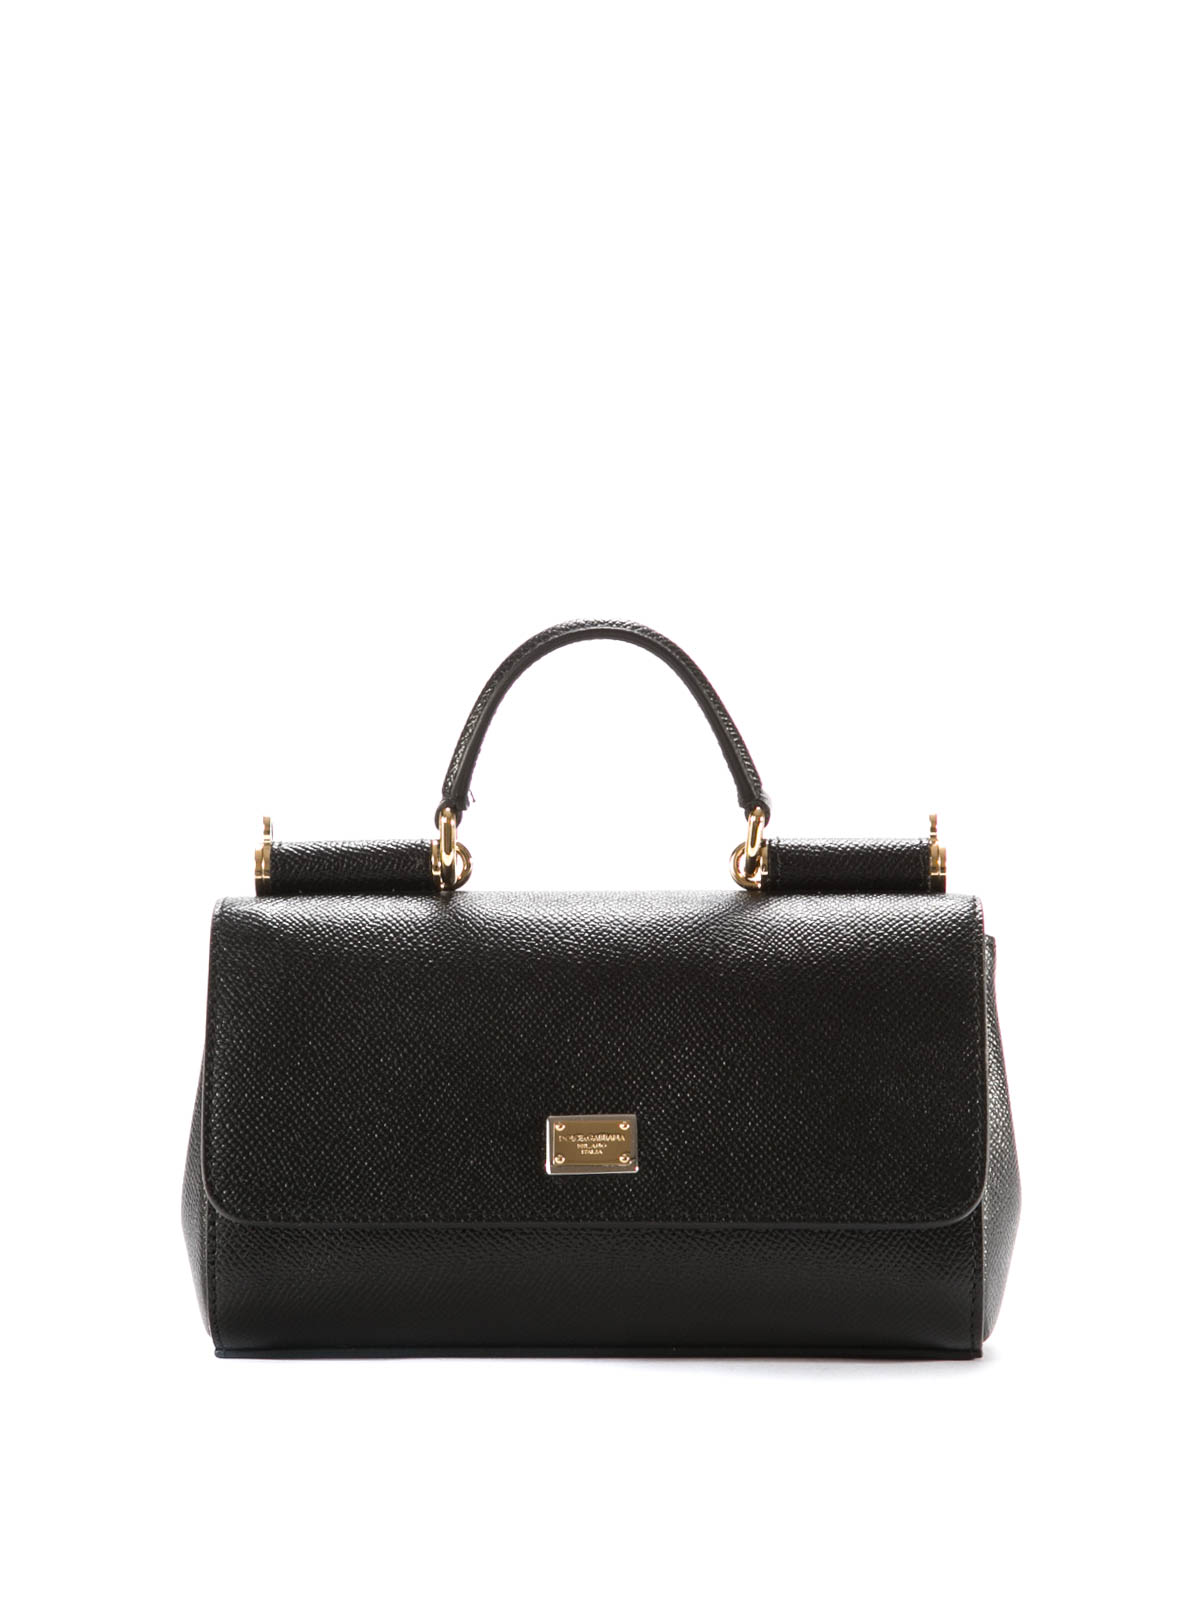 Dolce and Gabbana Black Leather Mini Dauphine Crossbody Bag For